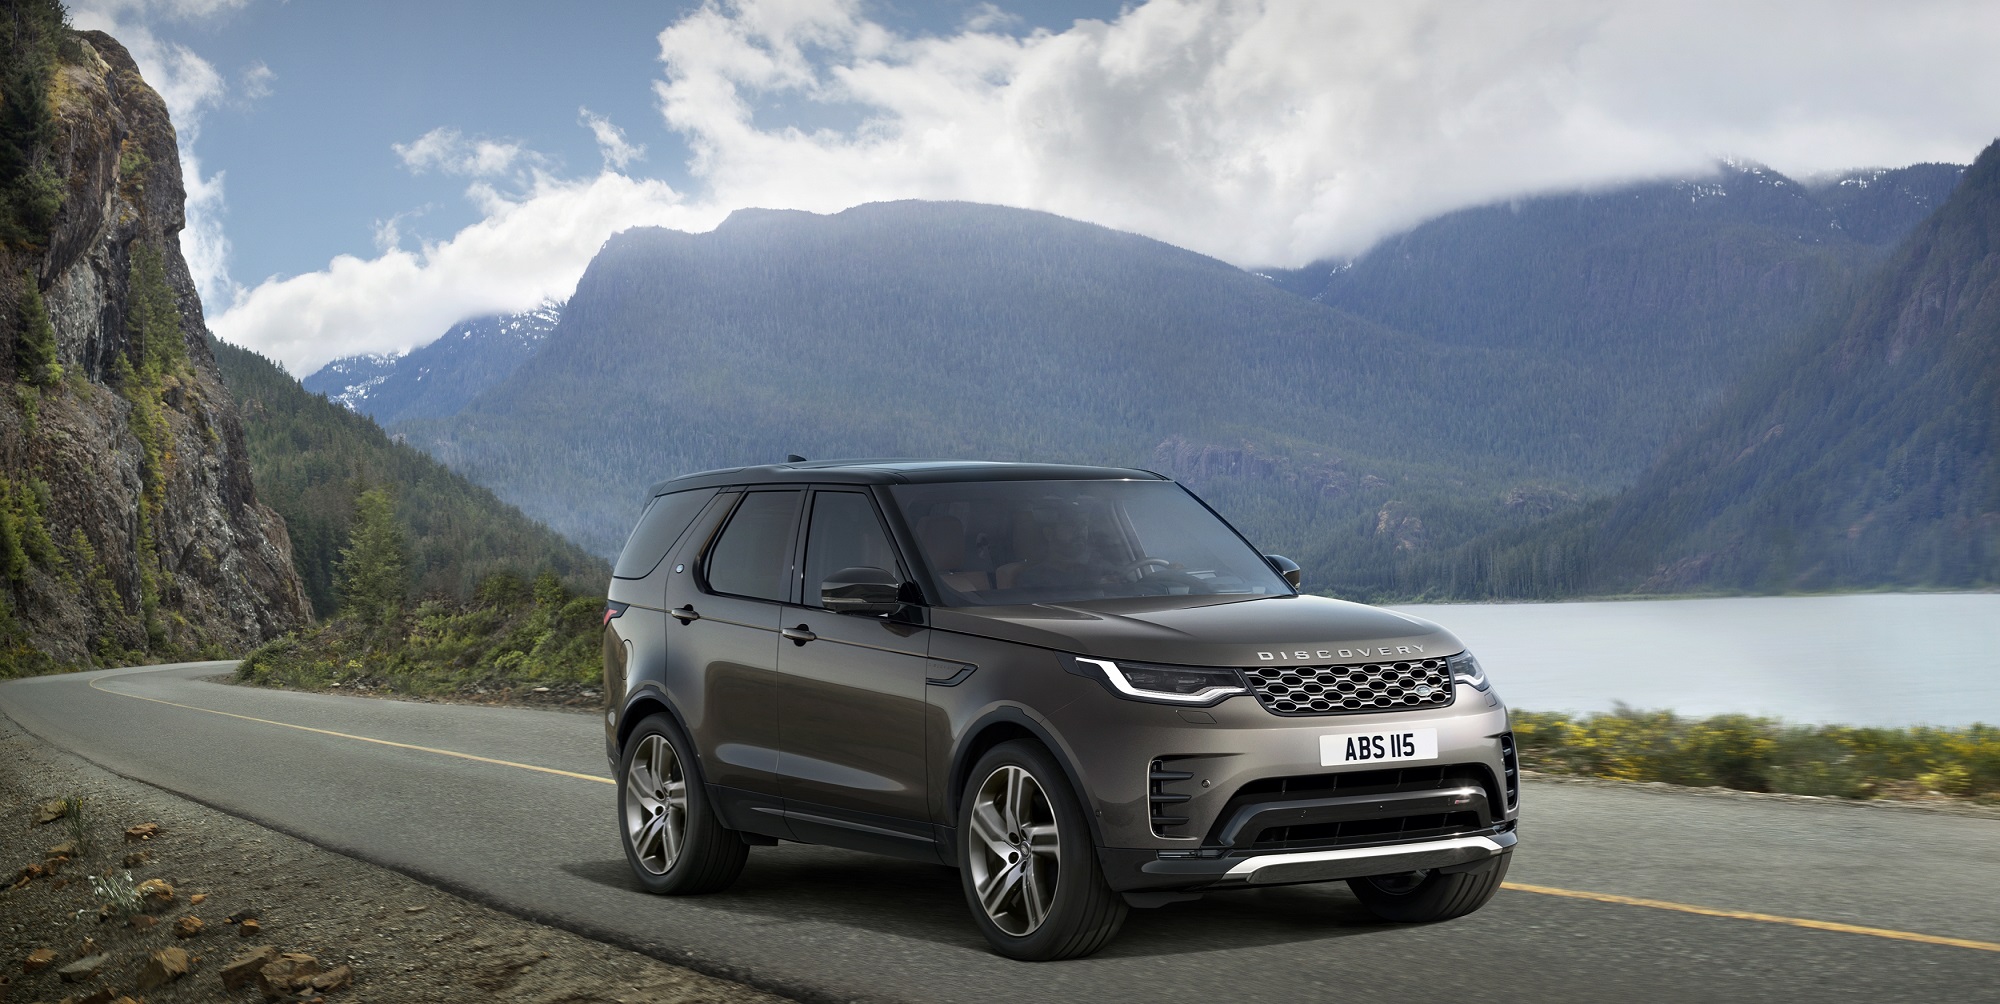 A 2023 Land Rover Discovery Metropolitan Edition drives on a road with a mountainous background